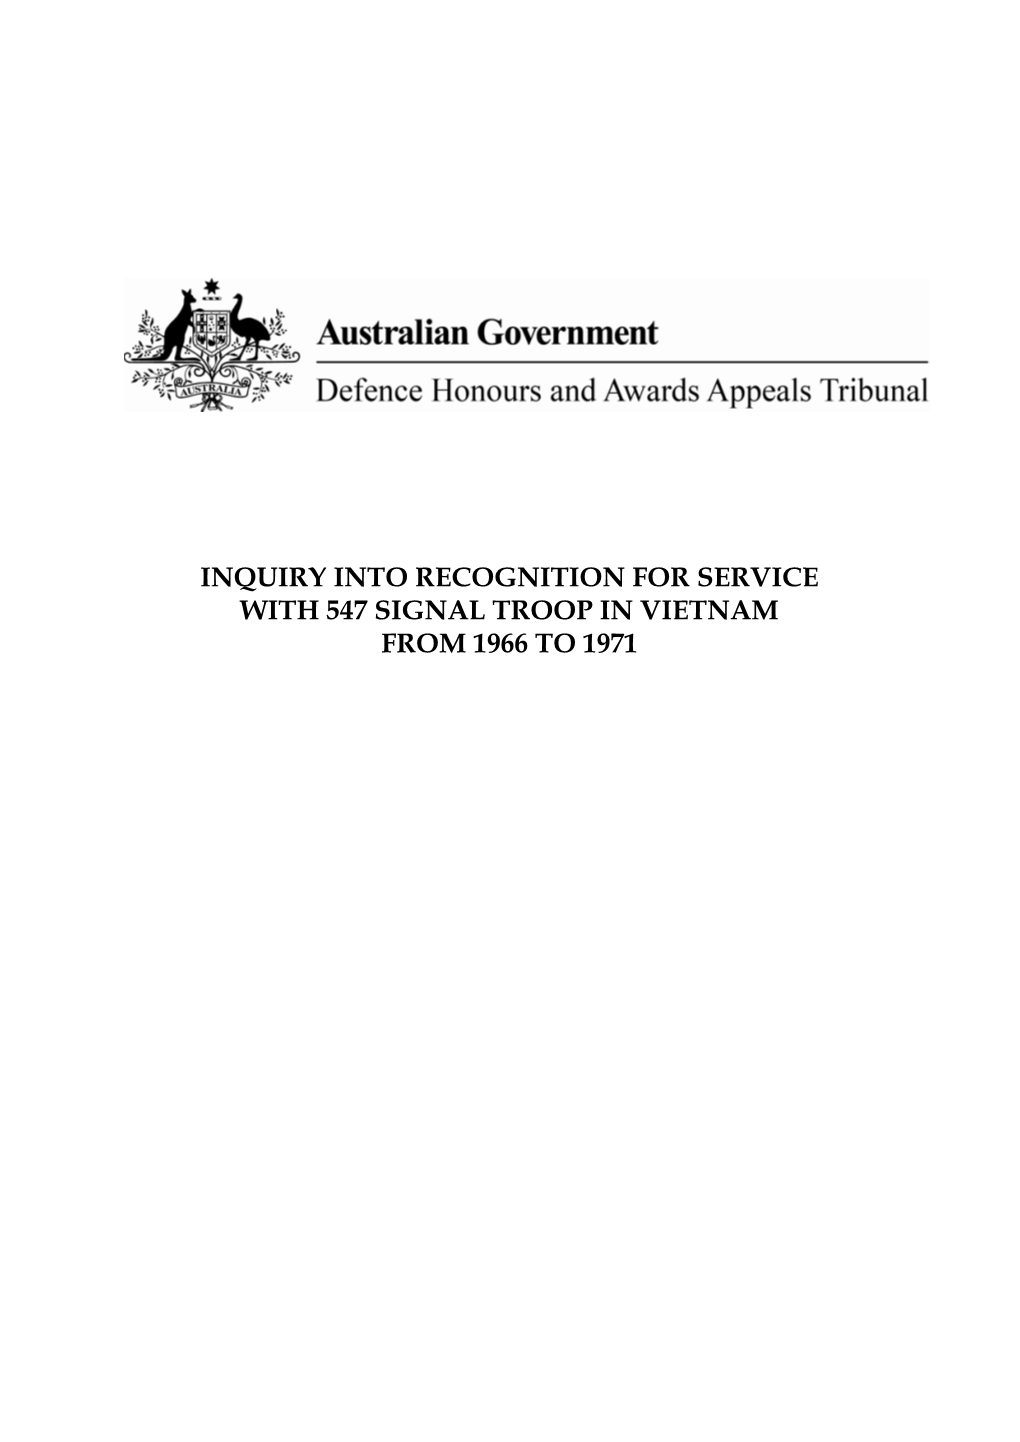 Report of the Inquiry Into Recognition for Service with 547 Signal Troop In